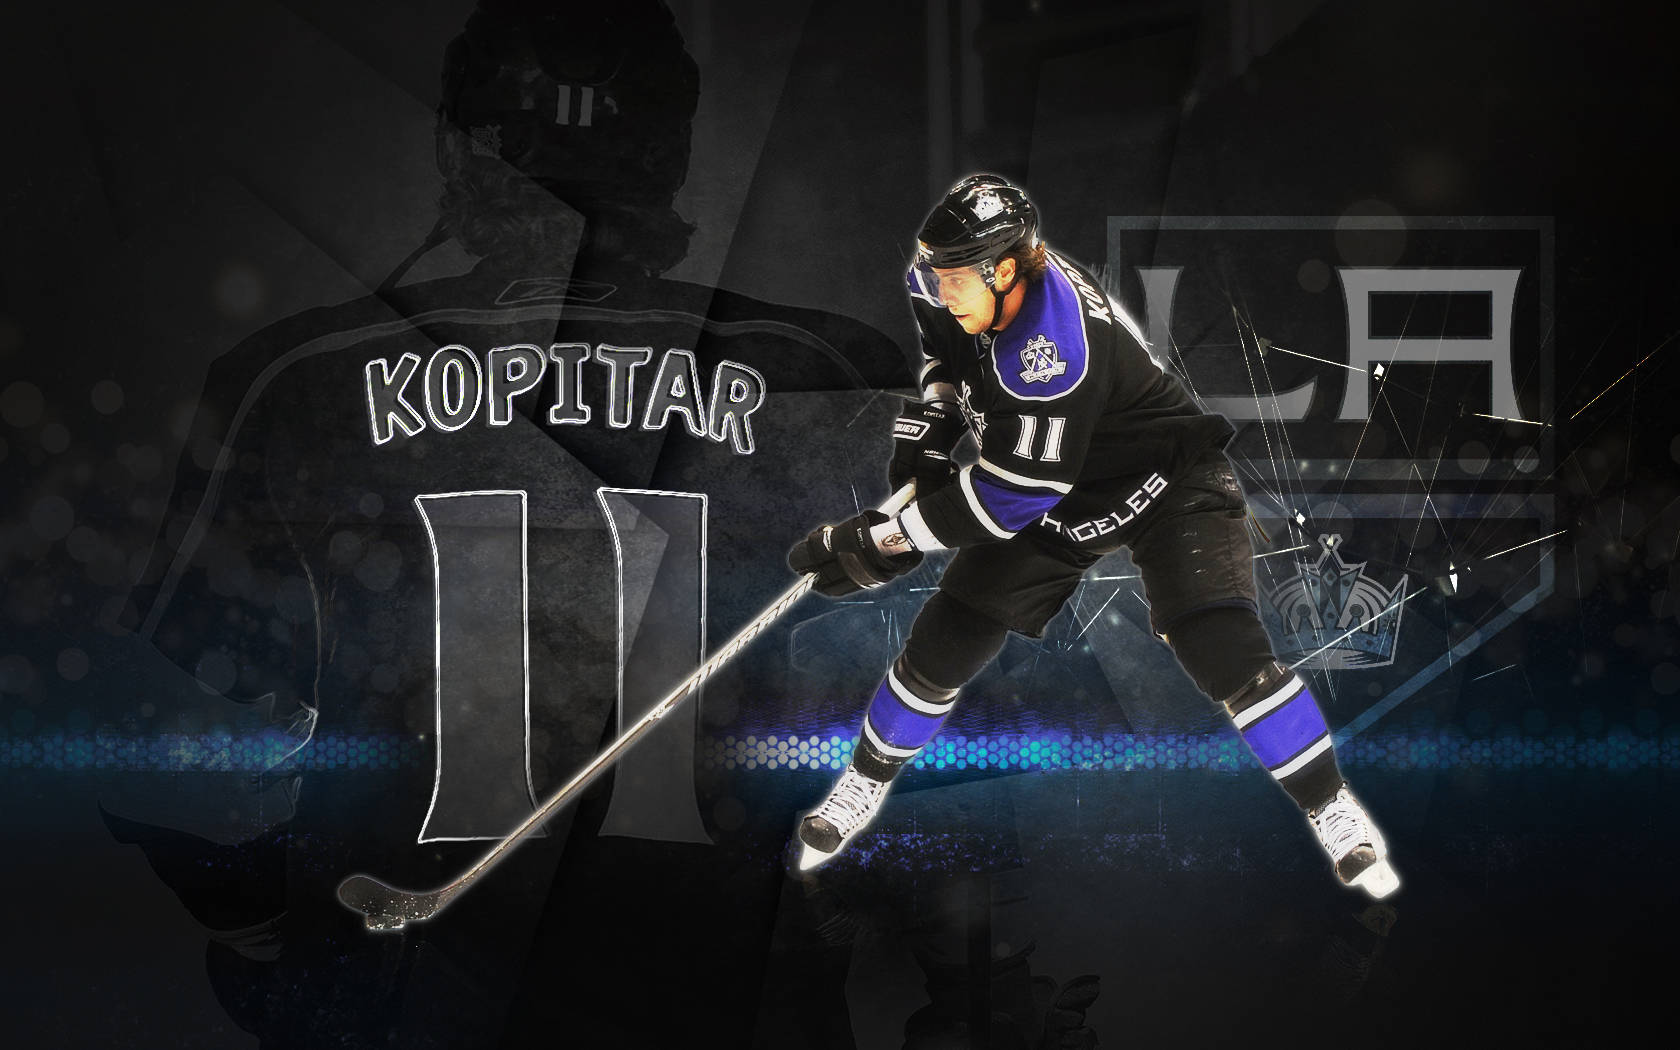 Losangeles Kings Nummer 11 Kopitar. (this Is Already In Swedish, But In English It Would Be 